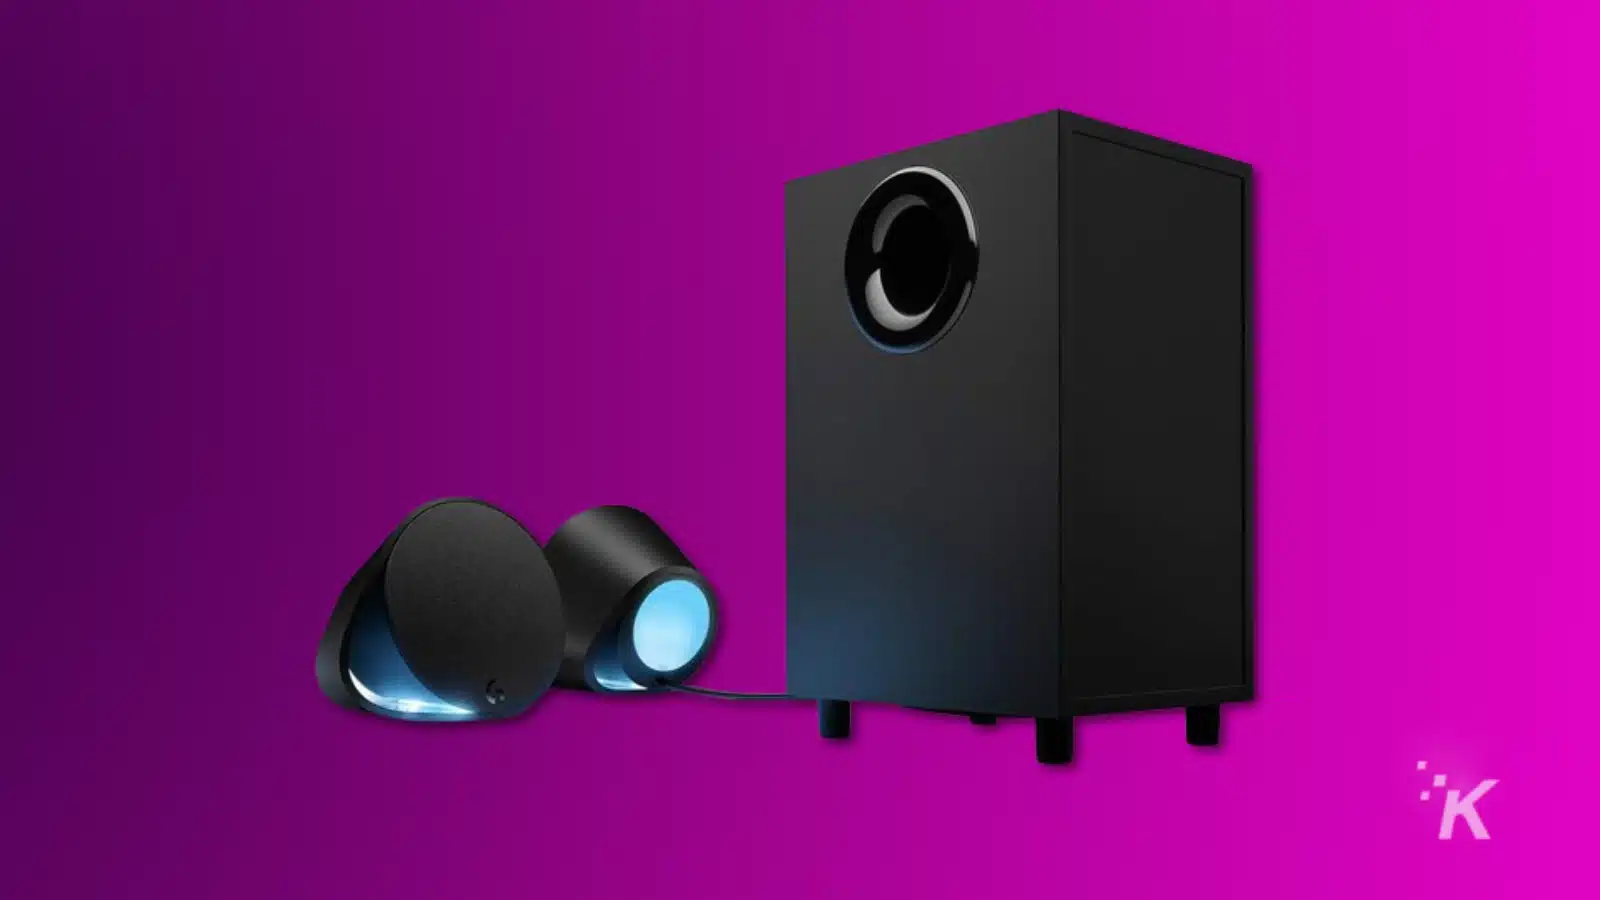 Render of logitech g560 gaming speakers and subwoofer on a purple background